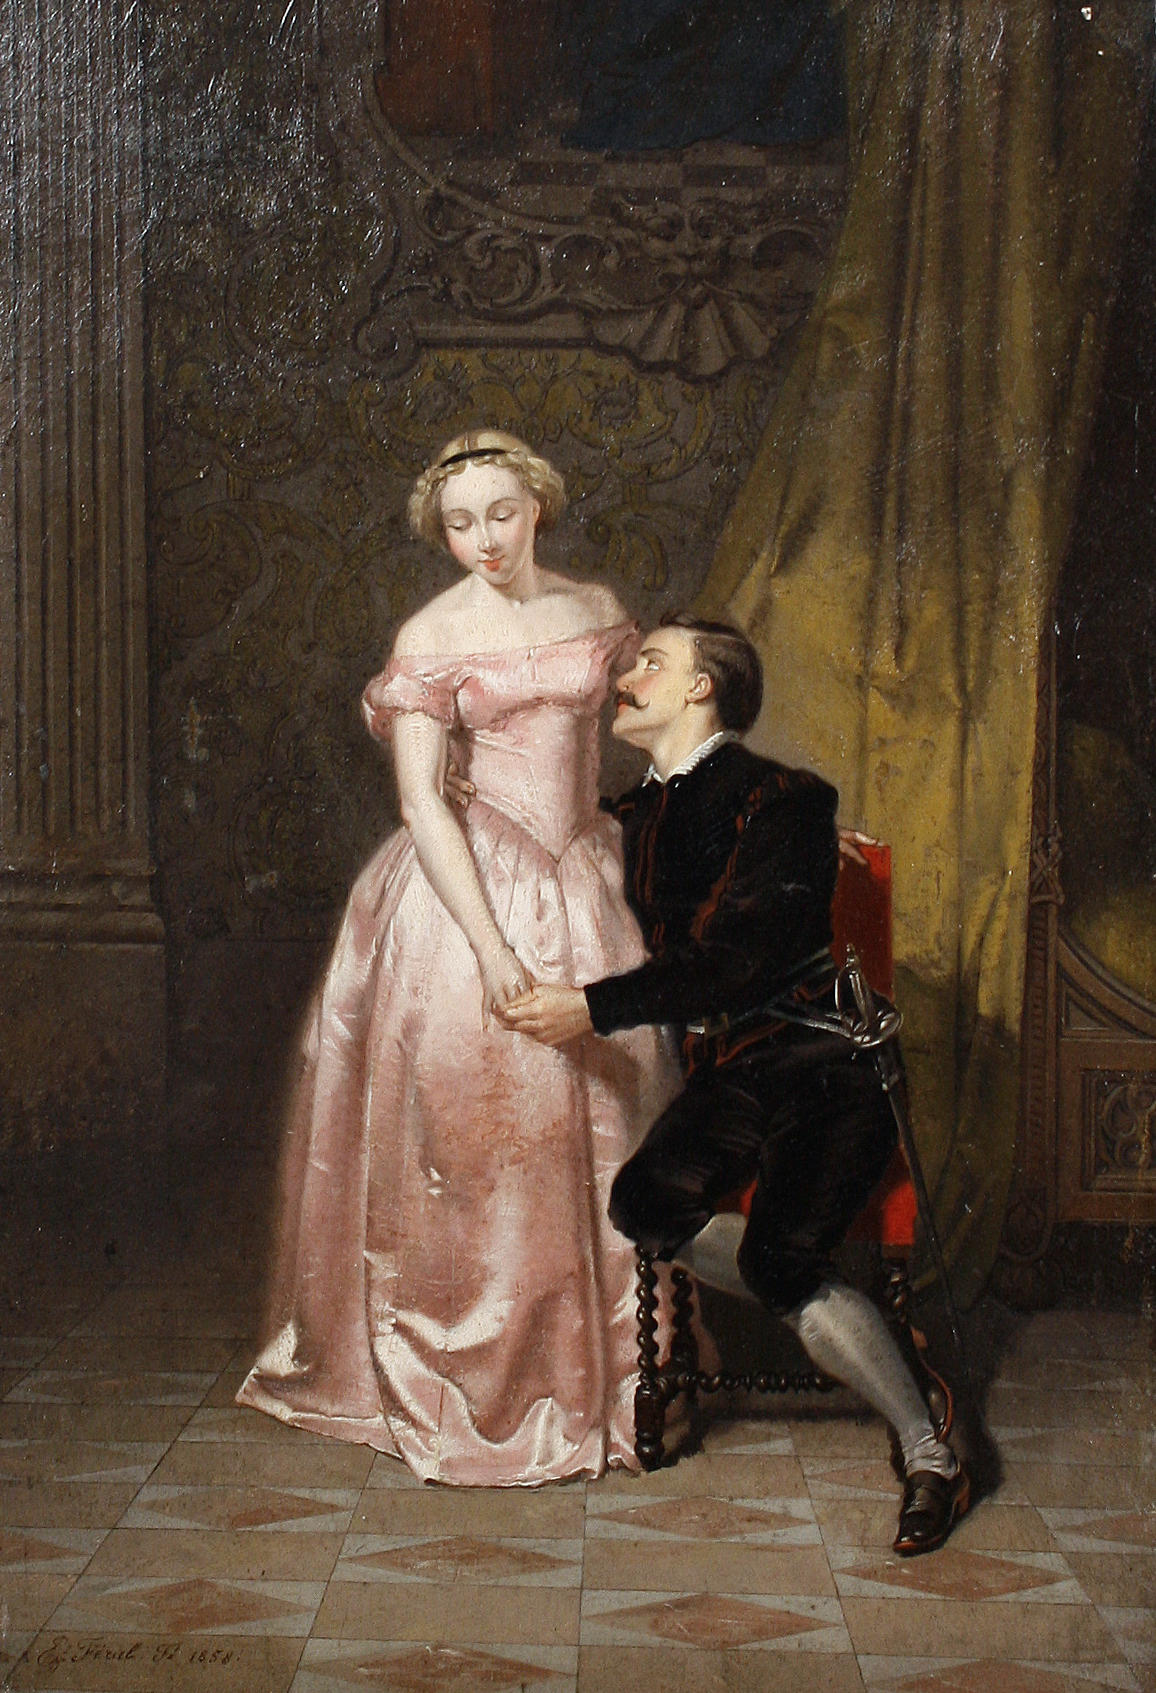 The Proposal by Eugene Feral, 1858